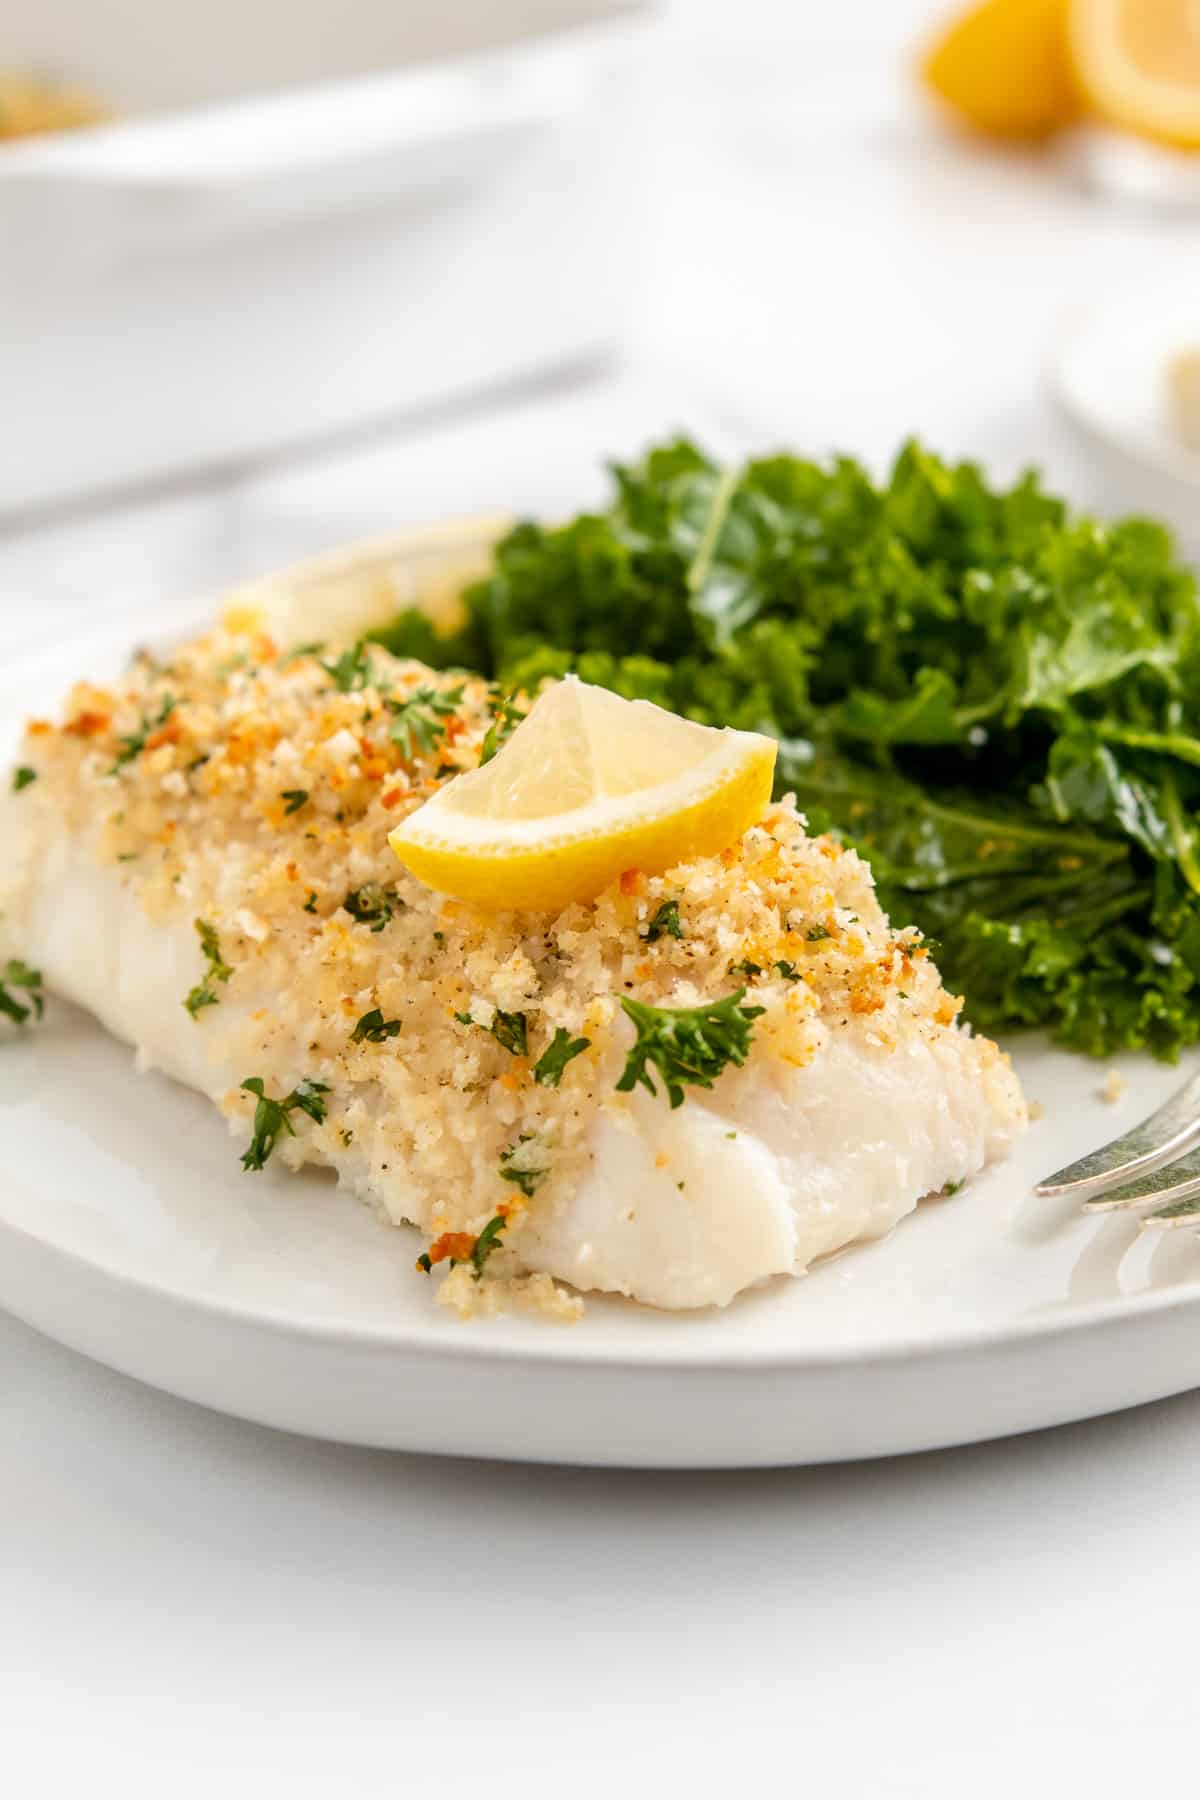 A piece of panko coated baked cod plated with sautéed kale.